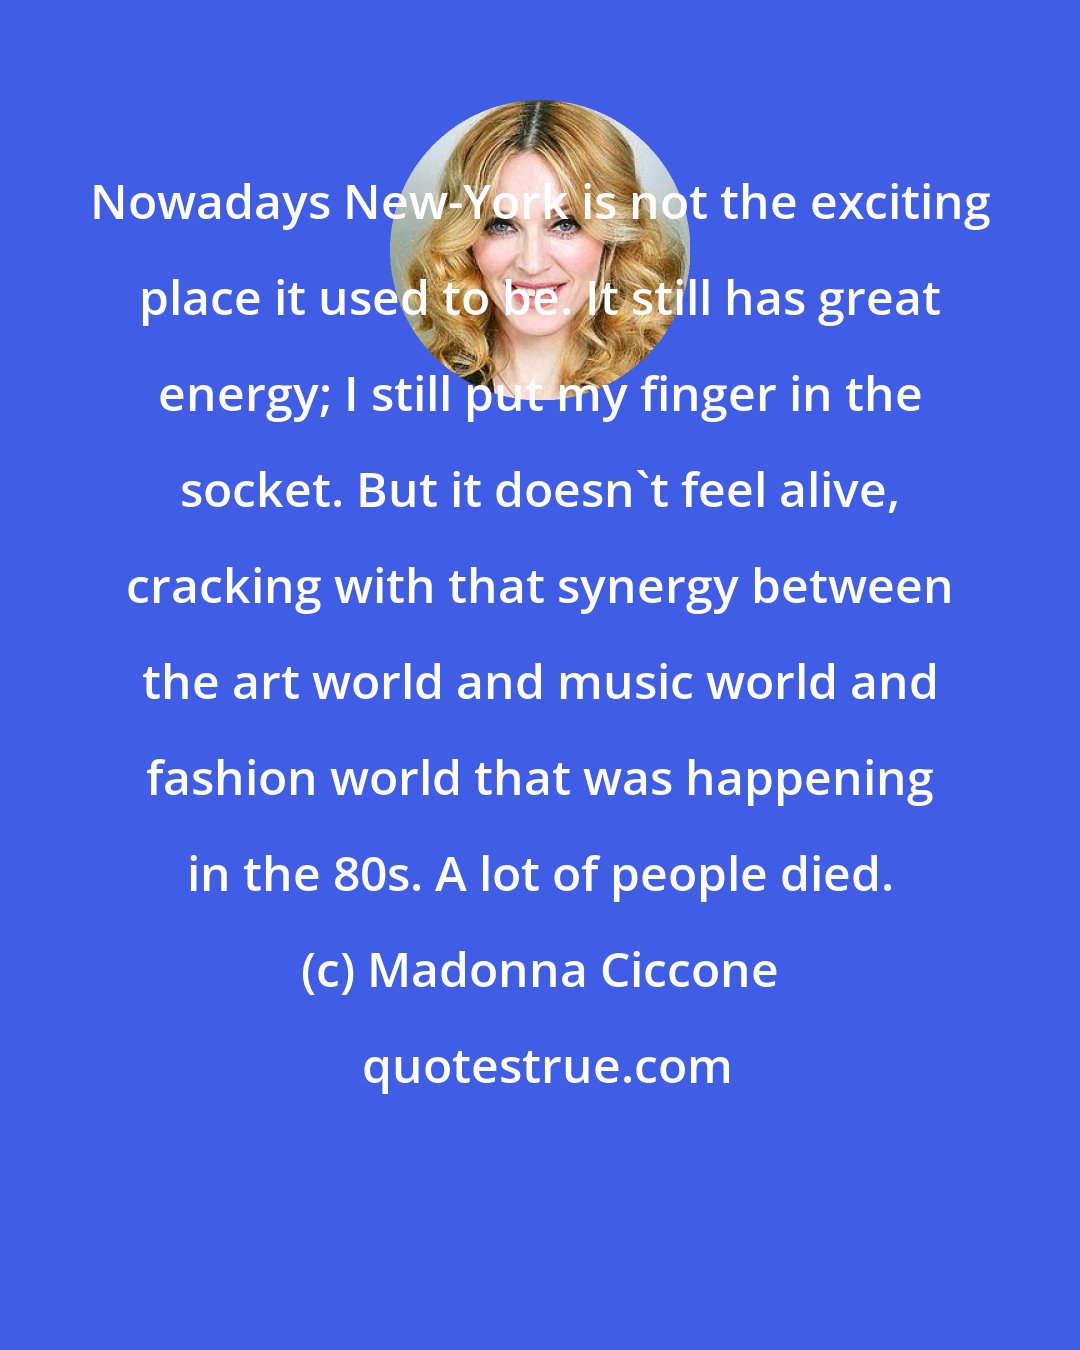 Madonna Ciccone: Nowadays New-York is not the exciting place it used to be. It still has great energy; I still put my finger in the socket. But it doesn't feel alive, cracking with that synergy between the art world and music world and fashion world that was happening in the 80s. A lot of people died.